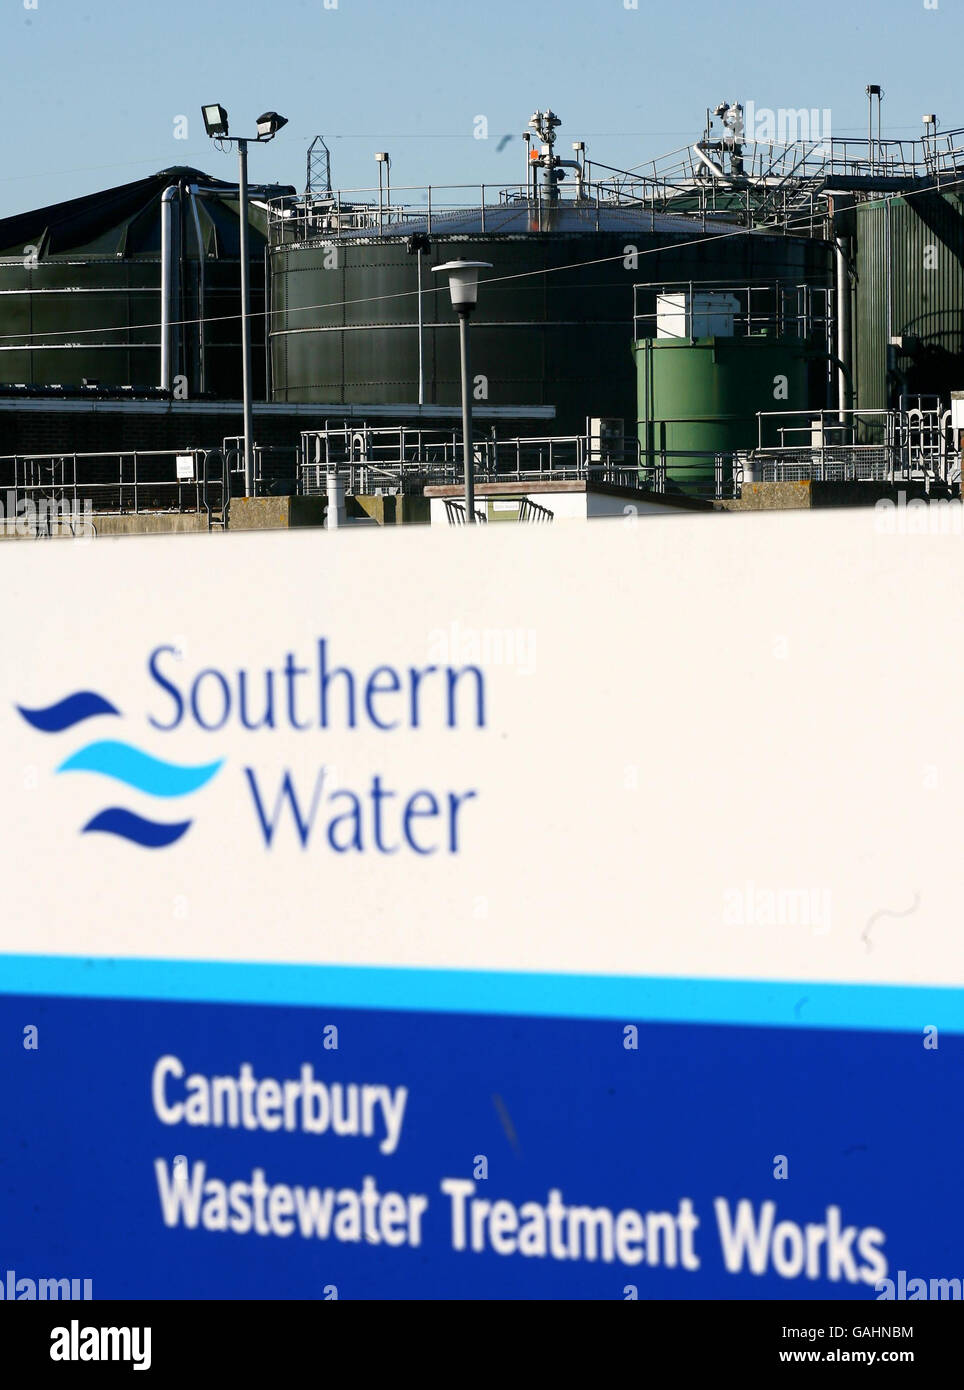 A general view of the Southern Water Canterbury Wastewater Treatment Works in Canterbury, Kent. The company has been fined 20.3 million for poor service and deliberately misreporting information, Ofwat said today. Stock Photo